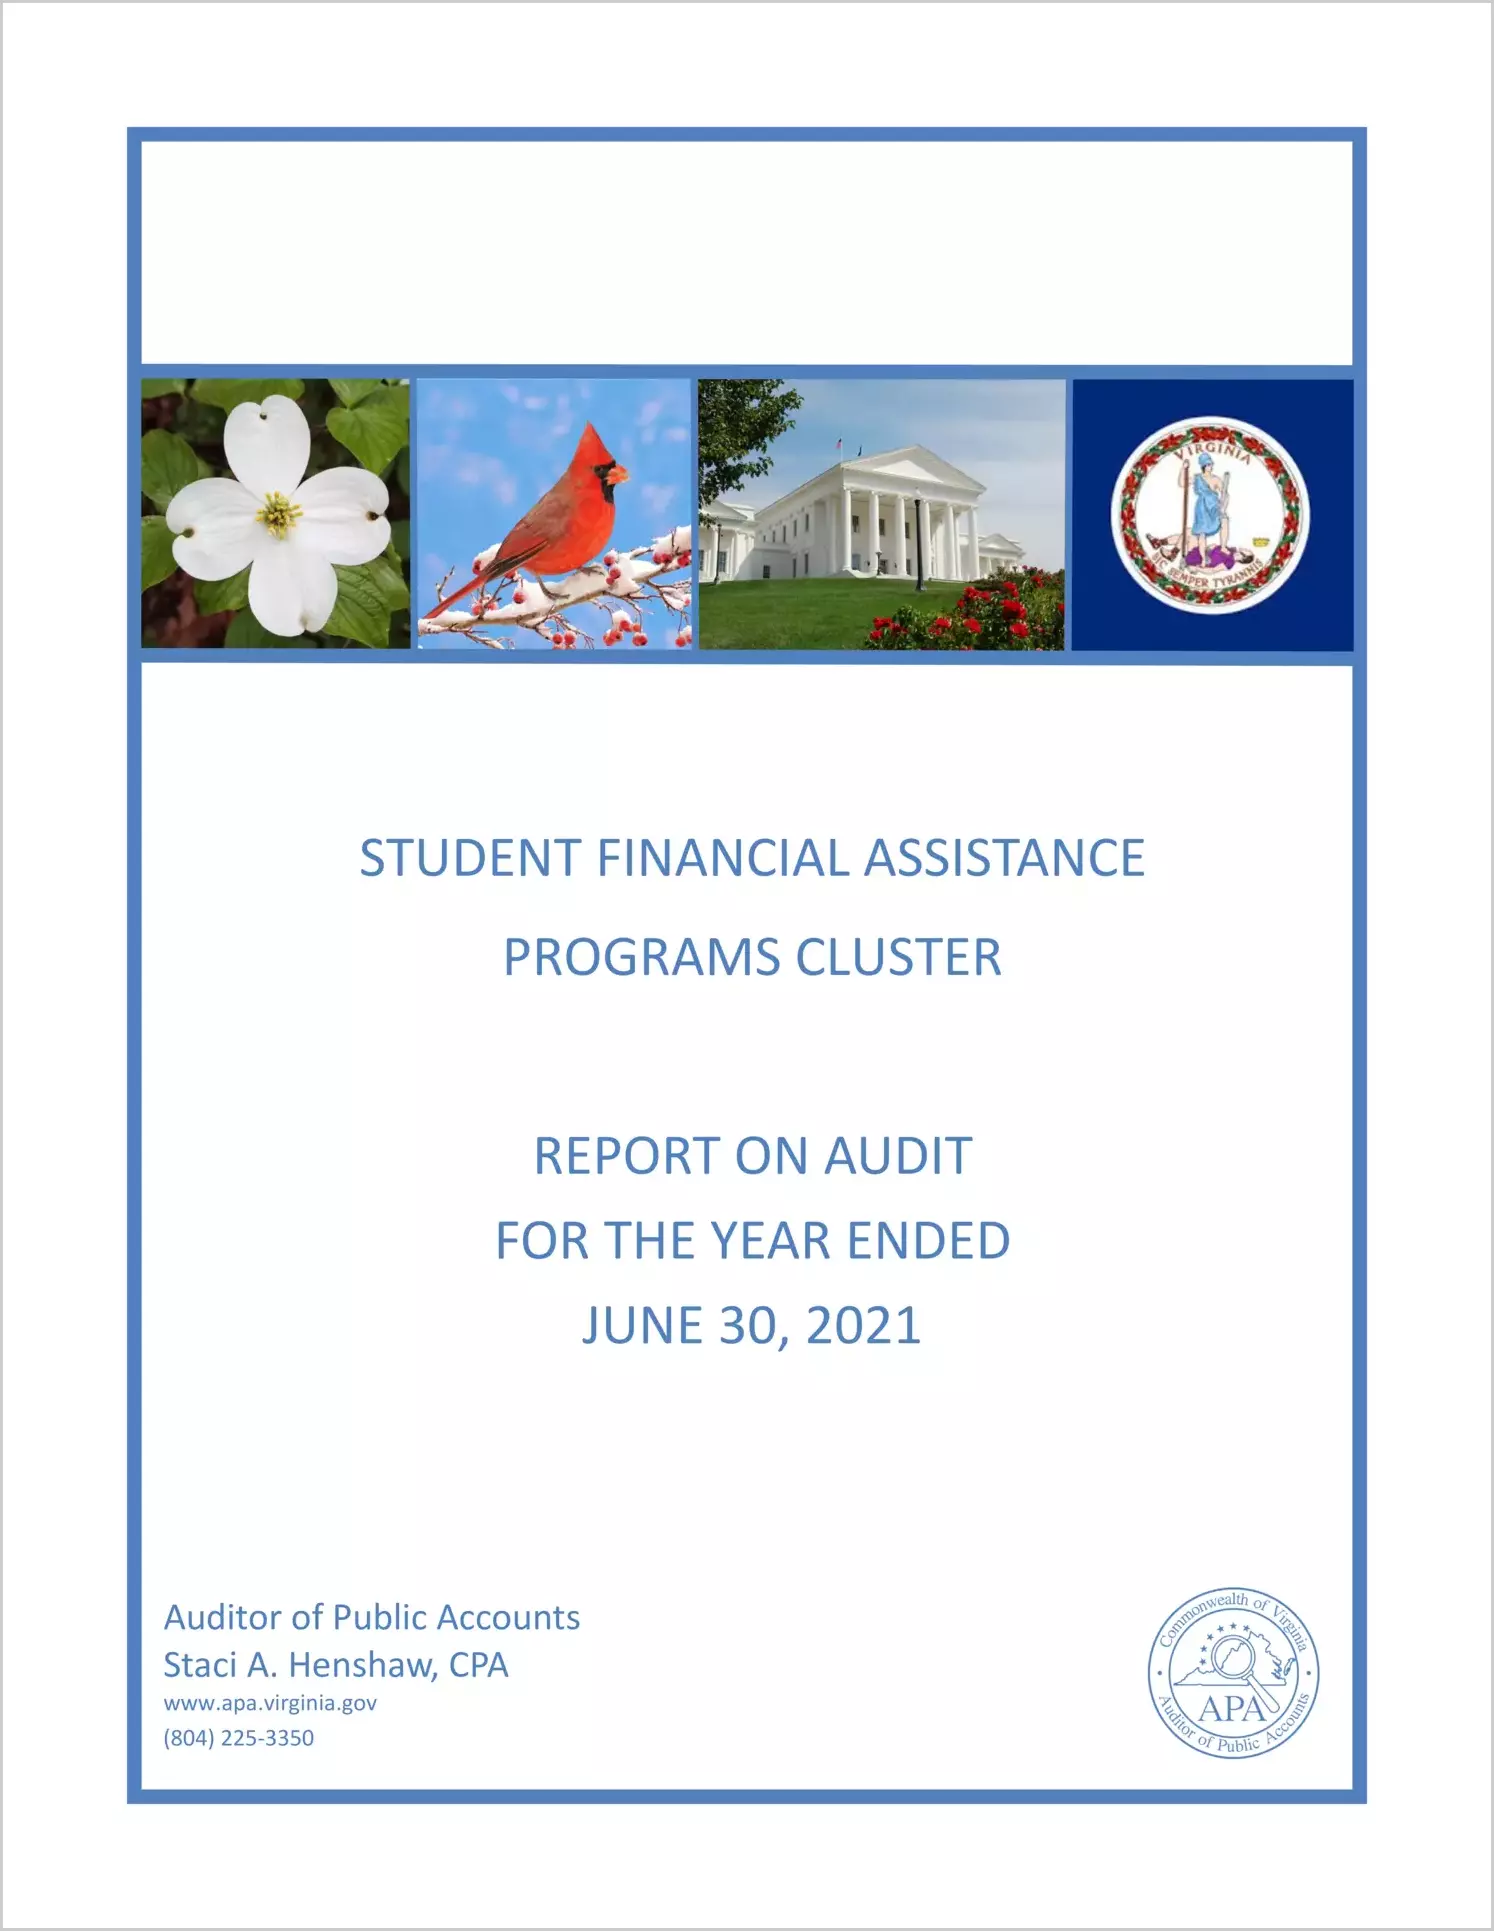 Student Financial Assistance Programs Cluster for the year ended June 30, 2021